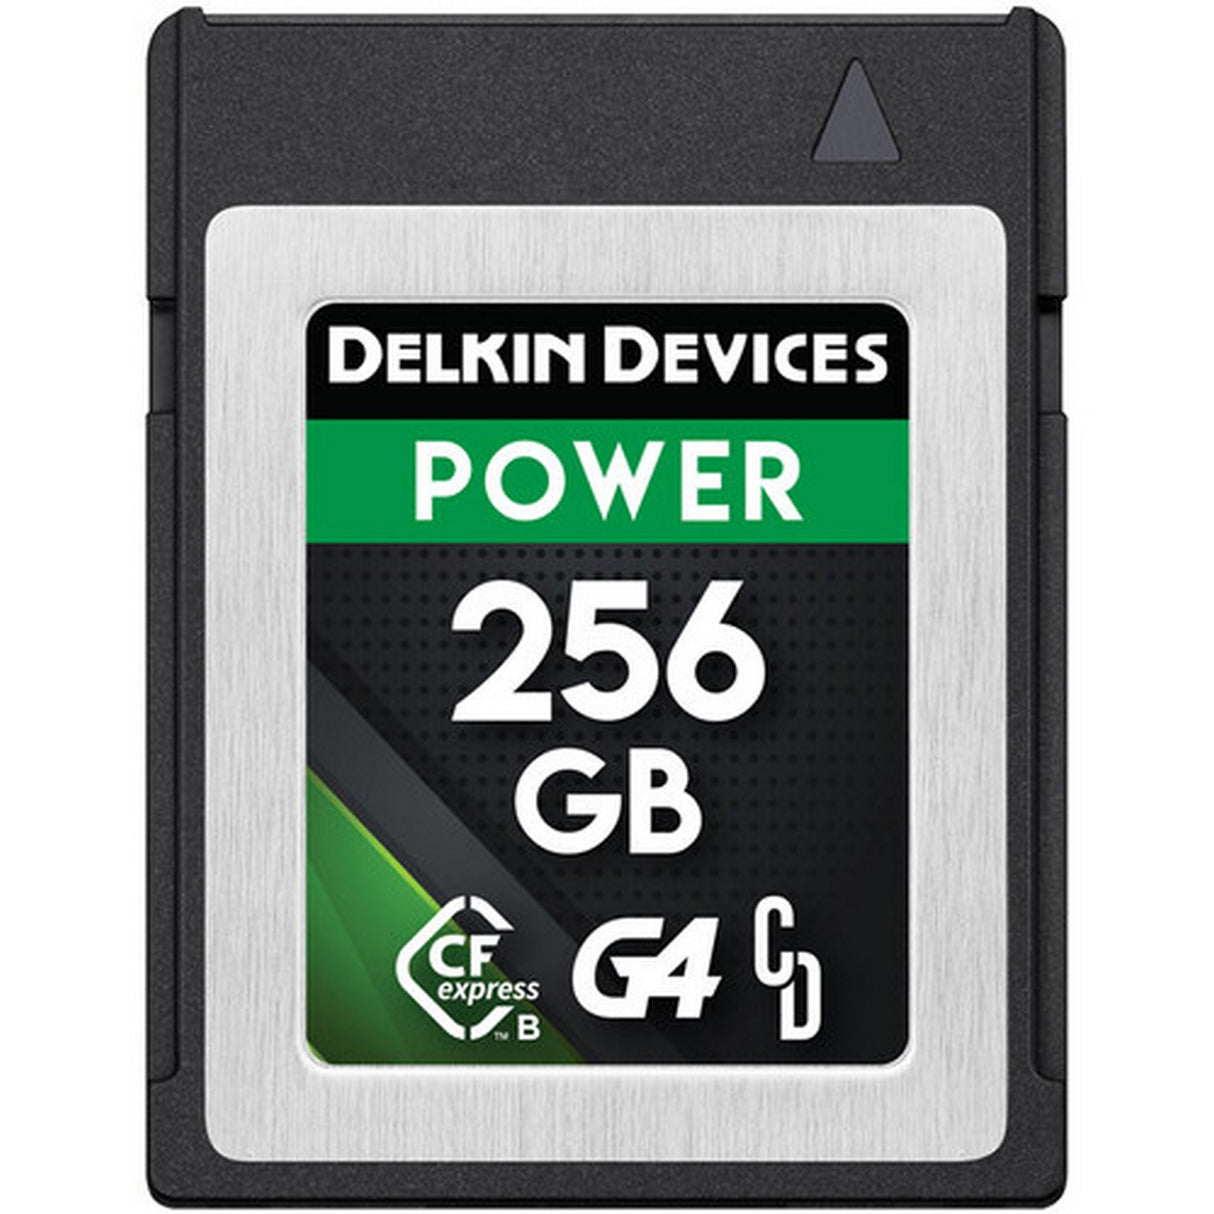 Delkin Devices CFexpresss Power Type B Memory Card, 256GB